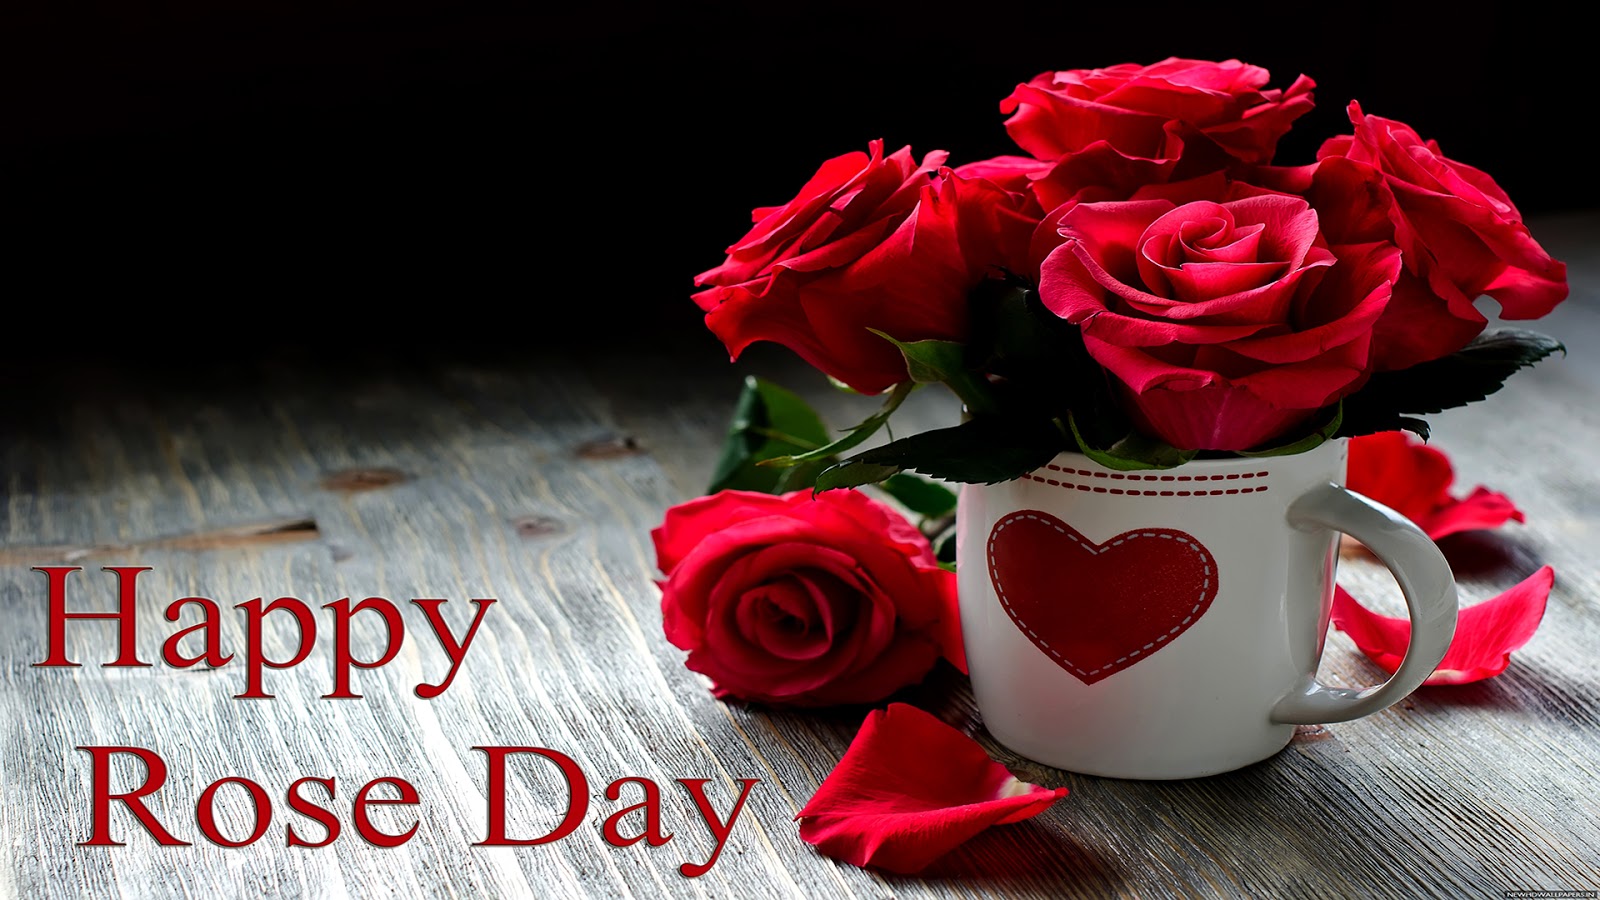 Happy Rose Day Wallpapers HD Download Free 1080p Colorfullhdwallpapers